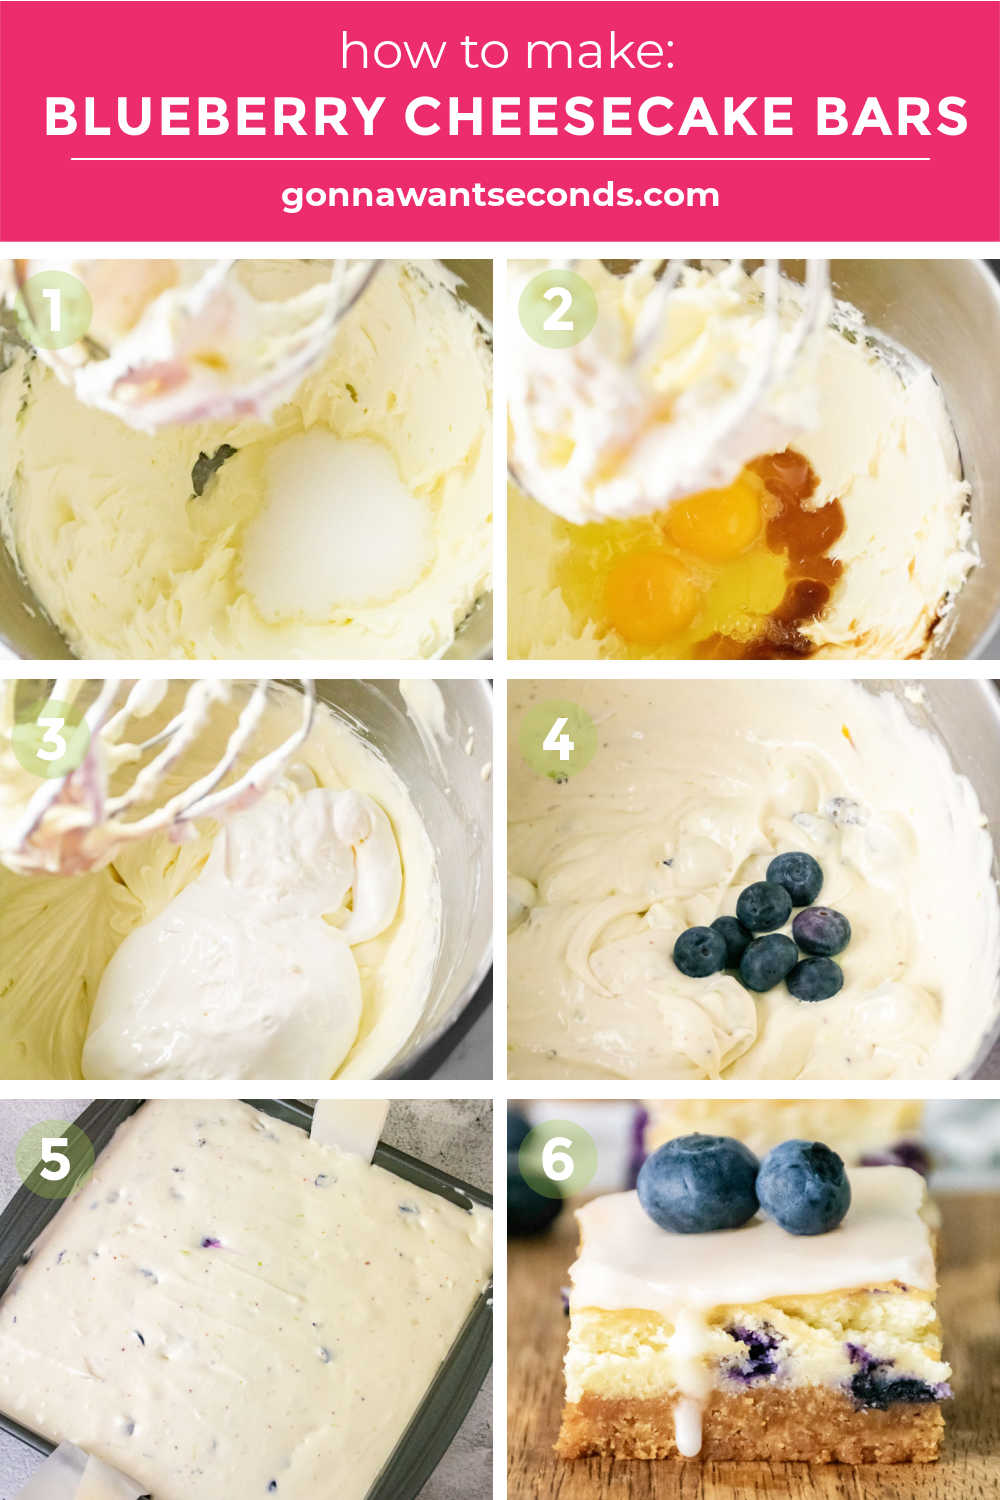 step by step how to make blueberry cheesecake bars